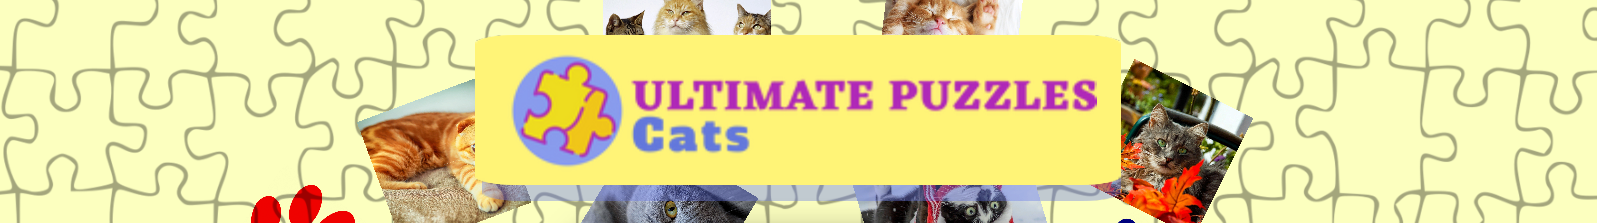 Ultimate Puzzles Cats